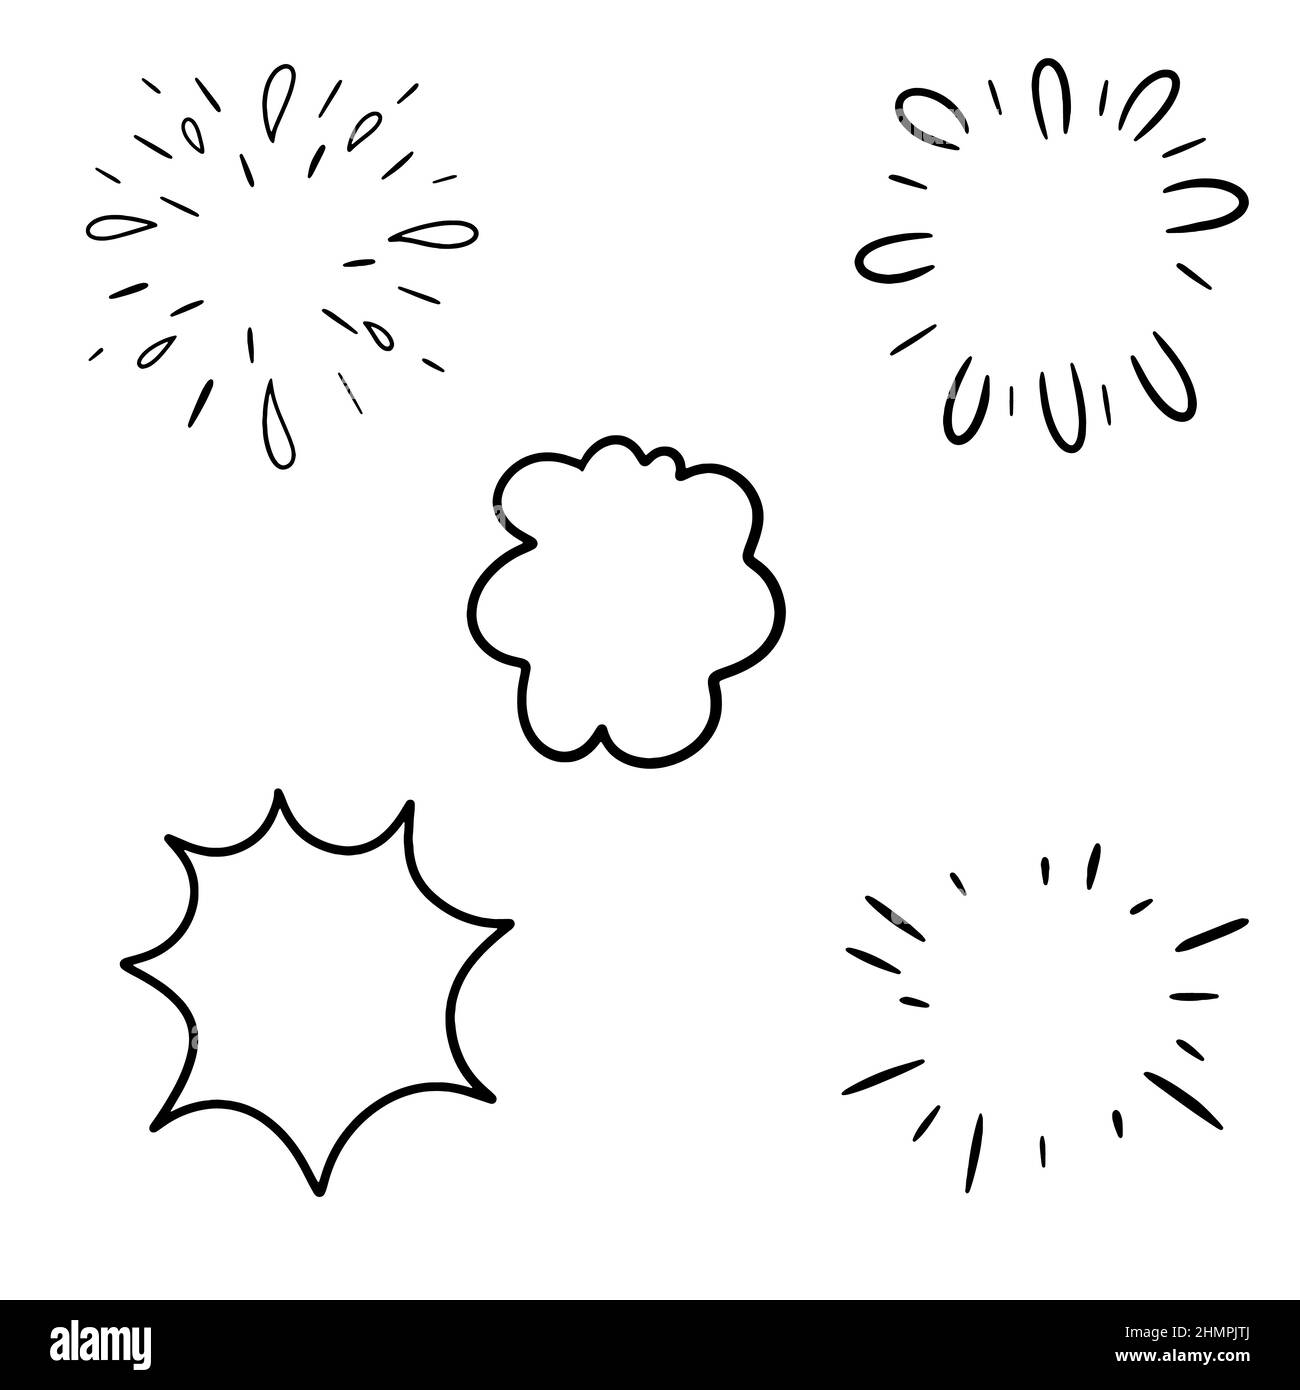 Doodle style bomb explosion set. Speech in bubbles. Stock Vector